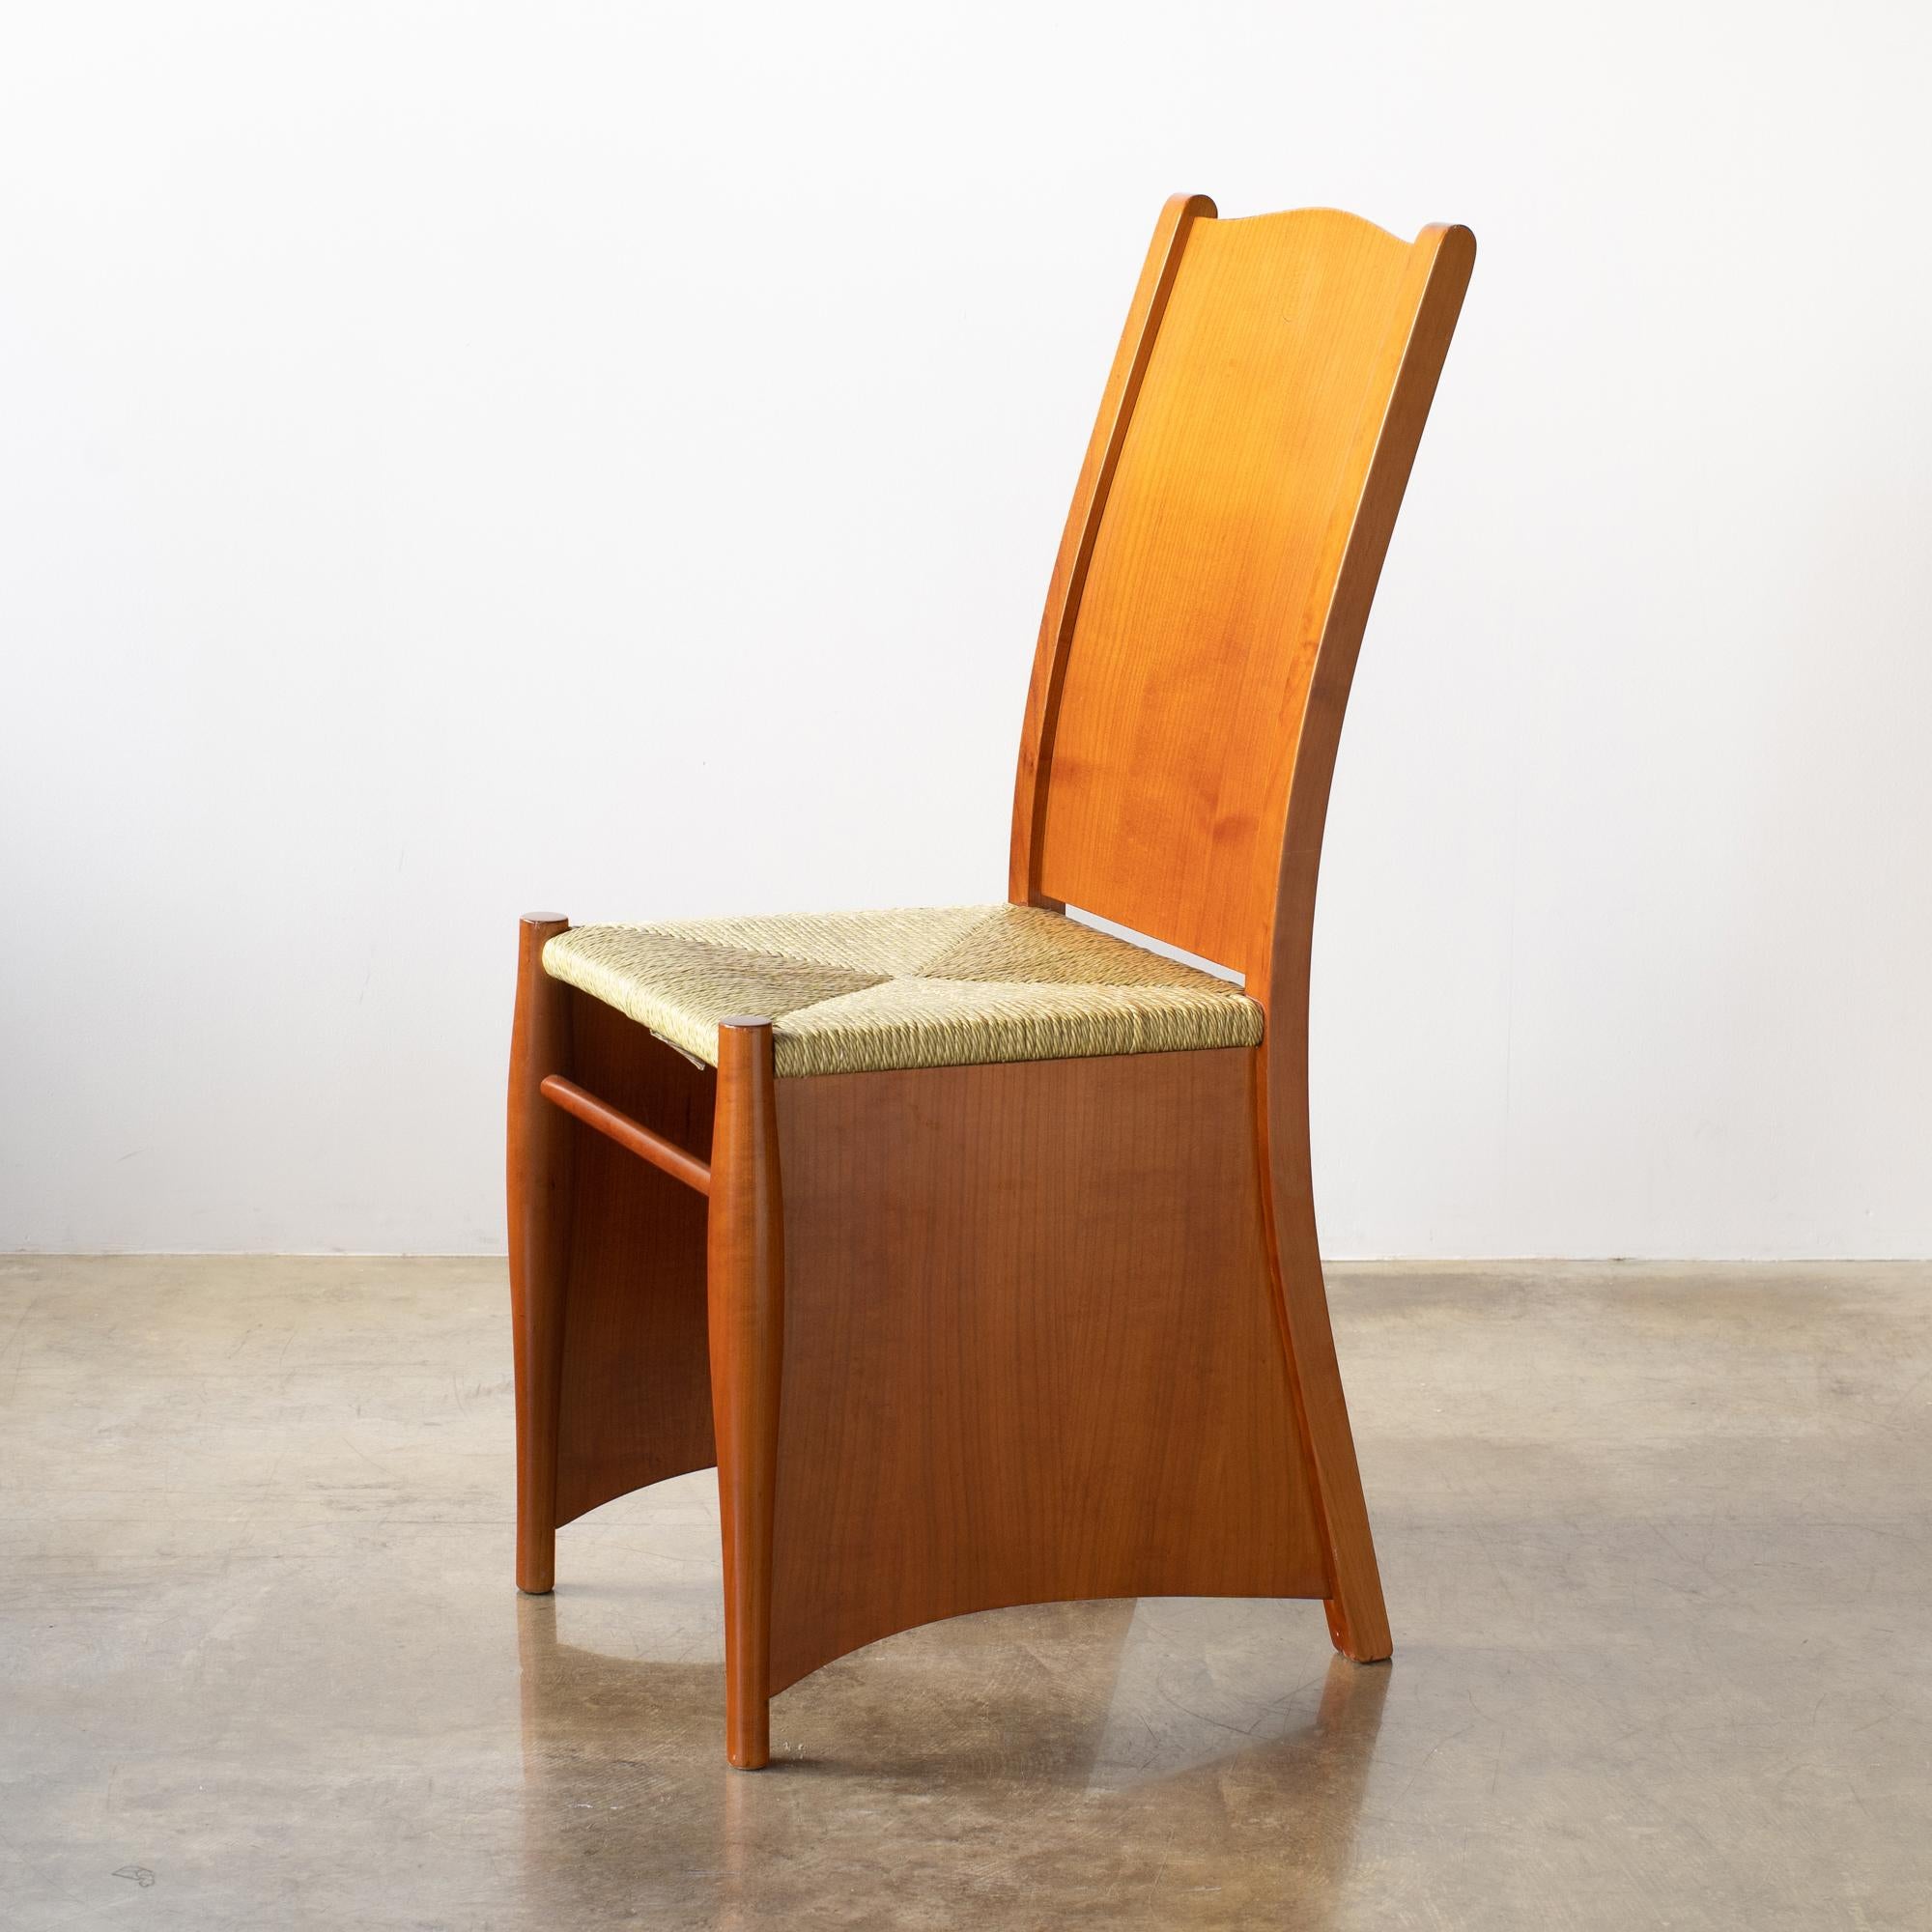 Bob Dubois designed by Philippe Starck for Driade. This chair is a rare work made of wood and paper cord in Strack chairs. Collectable piece of 1980s Starck. 
Production only period from 1987 to 1993.